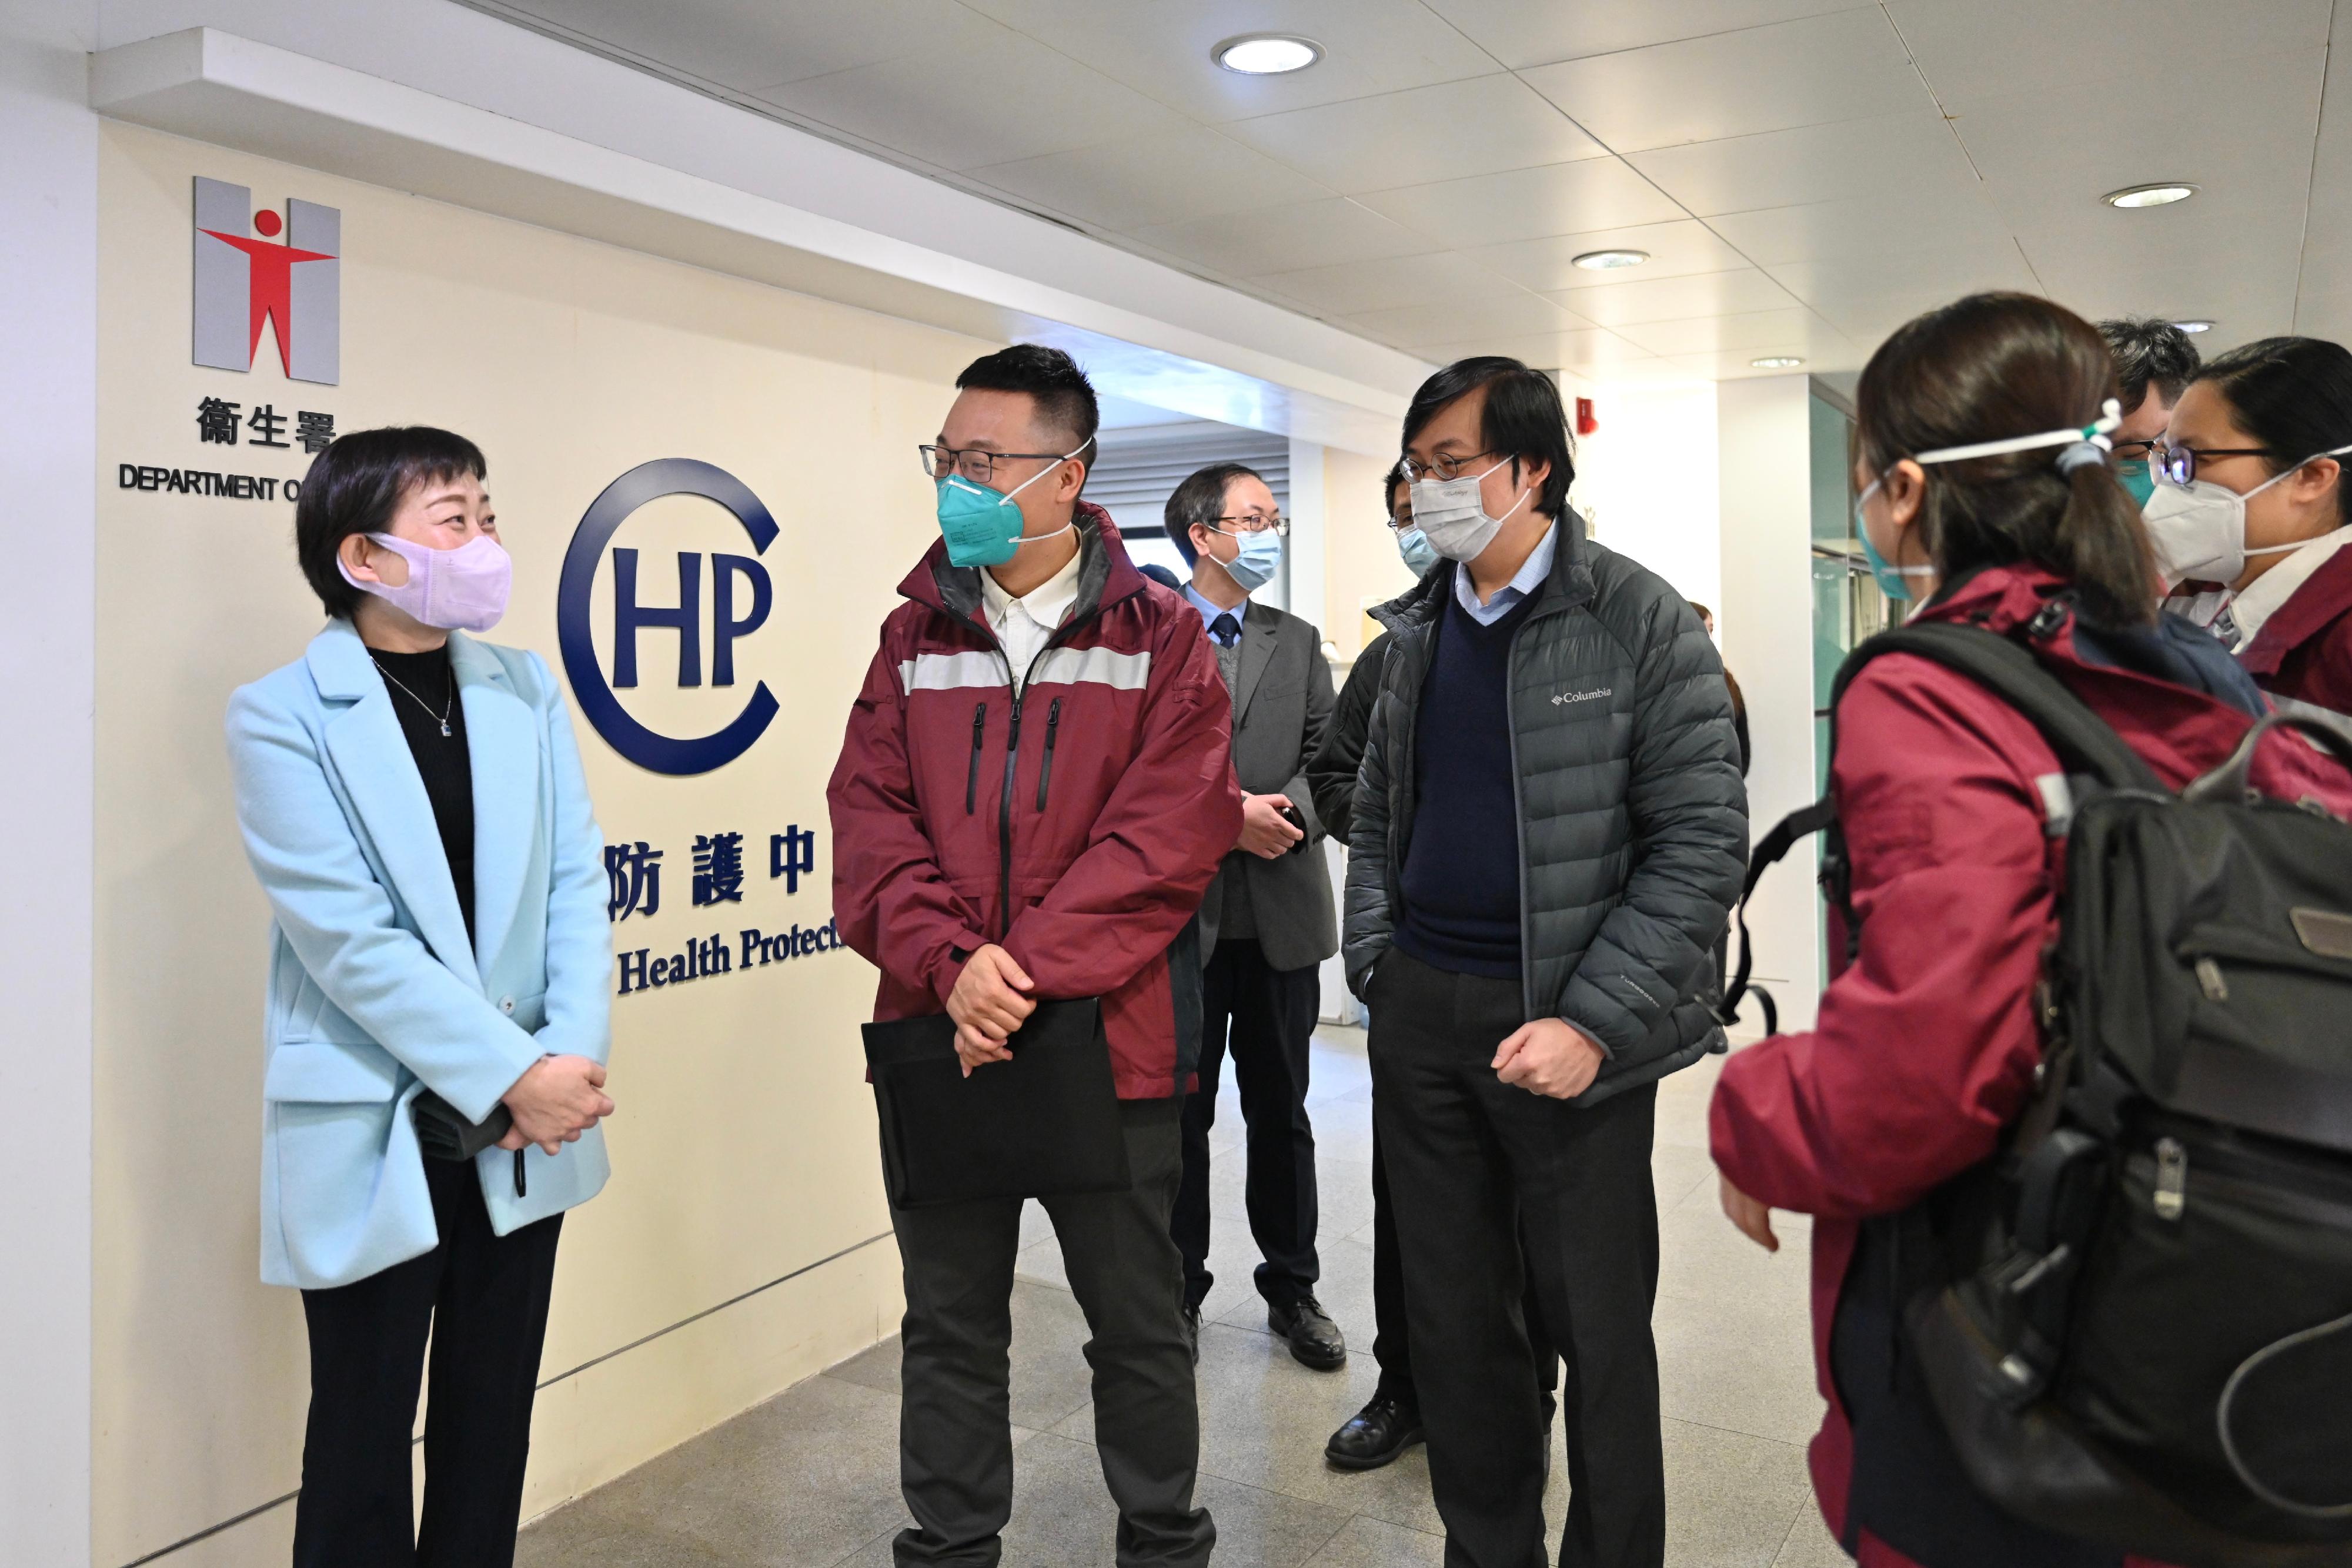 The four Mainland epidemiological experts visited the Centre for Health Protection (CHP) of the Department of Health this afternoon (February 18). Photo shows the Head of the Communicable Disease Branch of the CHP, Dr Chuang Shuk-kwan (front, first left), chatting with the Director of Institute of Infectious Disease Control and Prevention of the Guangdong Provincial Center for Disease Control and Prevention, Mr Kang Min (front, second left). Looking on is the Principal Medical and Health Officer of the Communicable Disease Branch of the CHP, Dr Albert Au (front, third left).